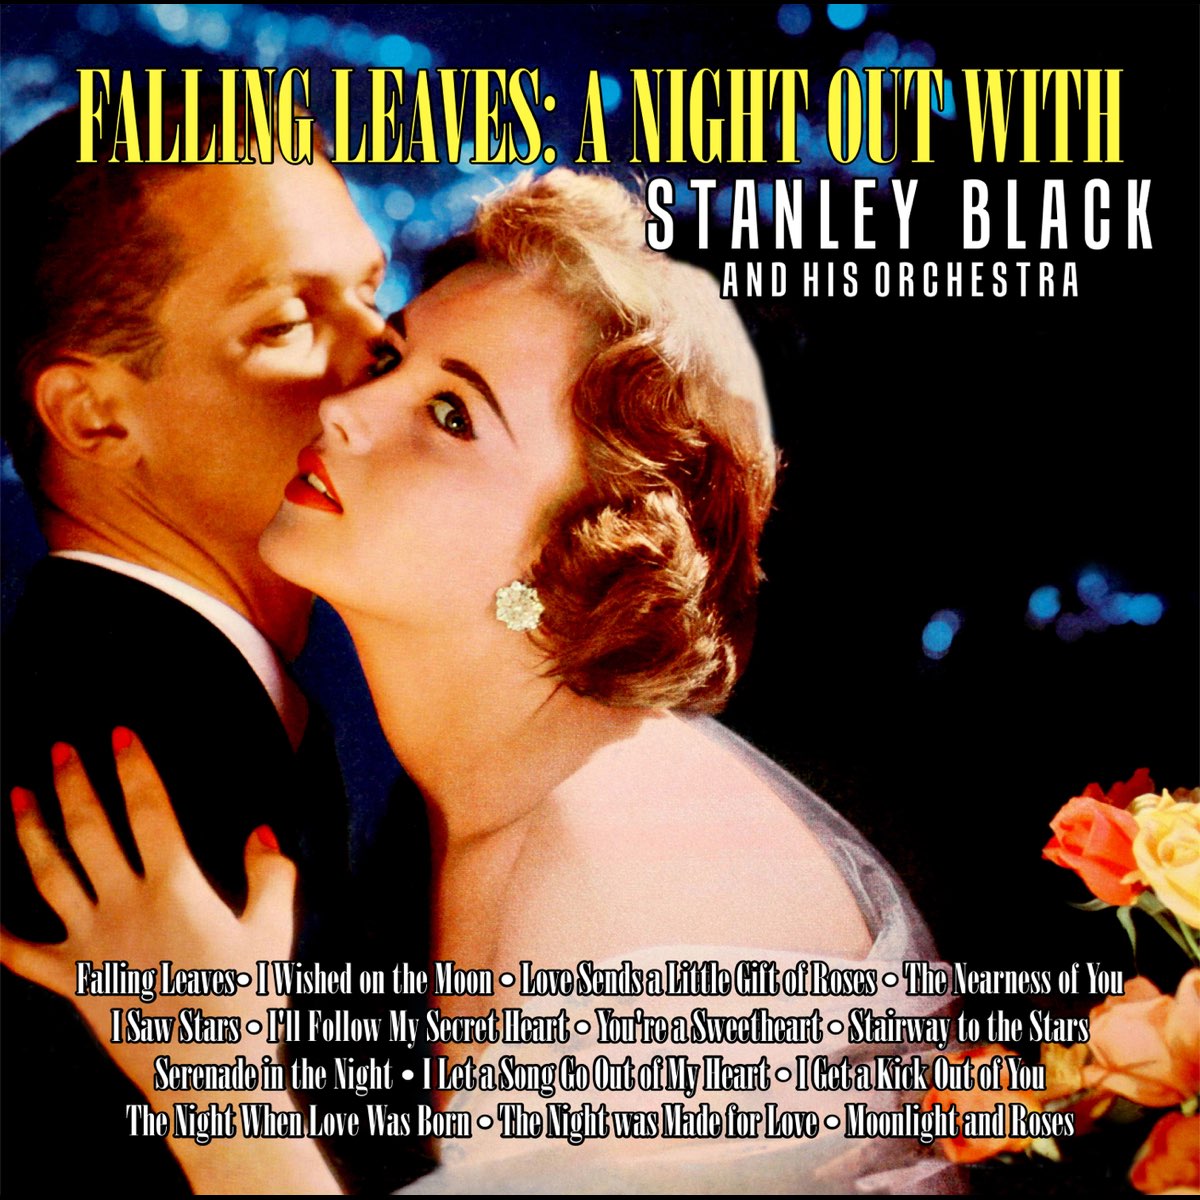 Falling Leaves: A Night Out with Stanley Black and His Orchestra - スタンリー・ ブラック楽団のアルバム - Apple Music